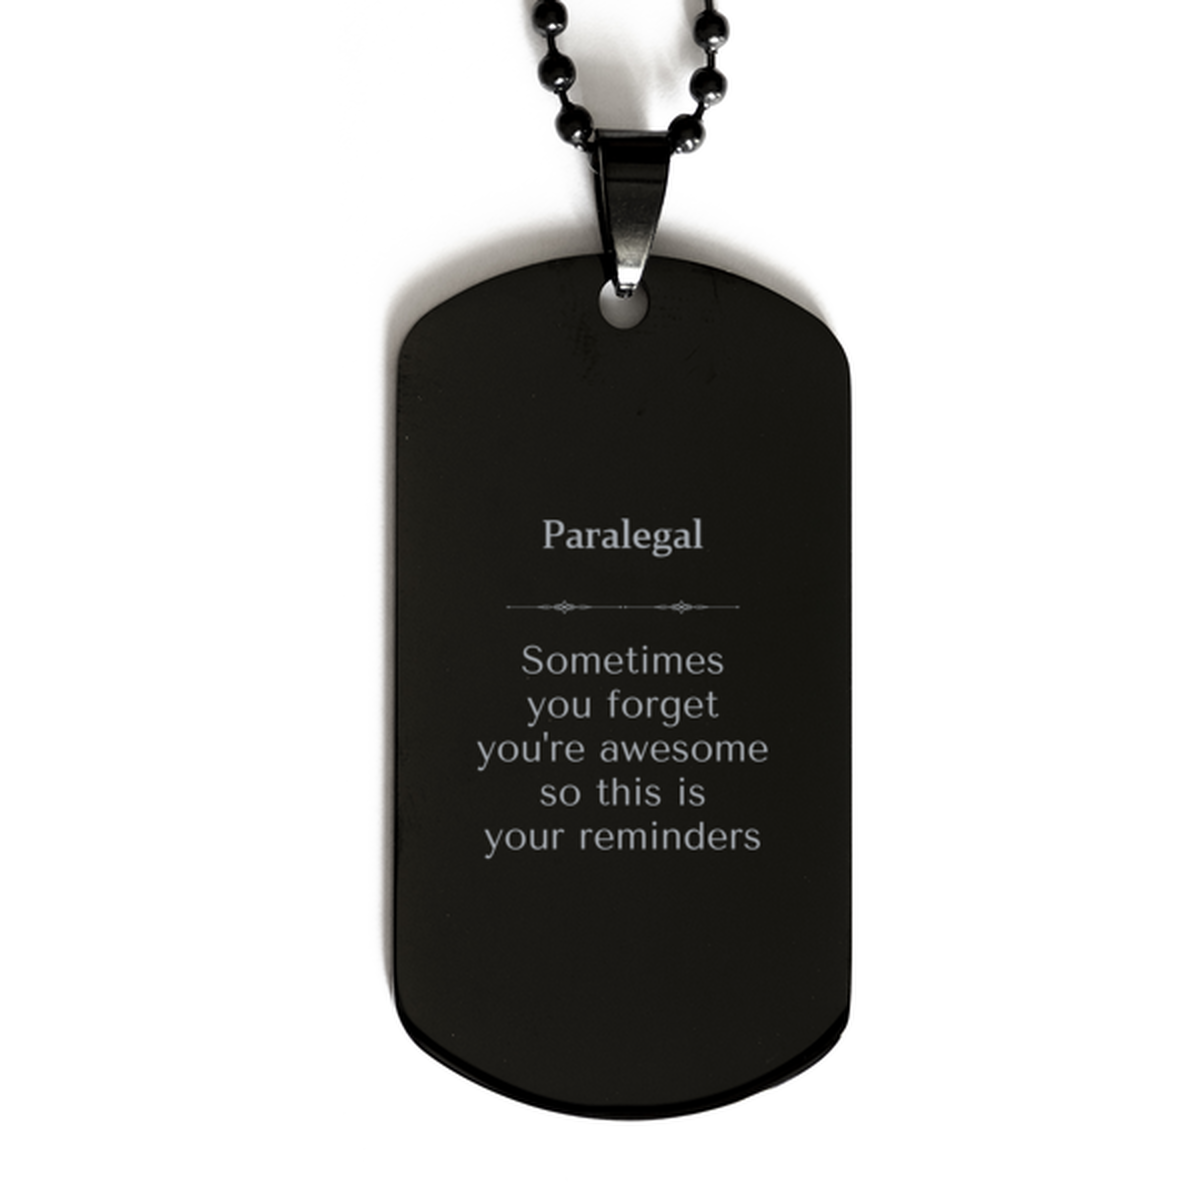 Sentimental Paralegal Black Dog Tag, Paralegal Sometimes you forget you're awesome so this is your reminders, Graduation Christmas Birthday Gifts for Paralegal, Men, Women, Coworkers